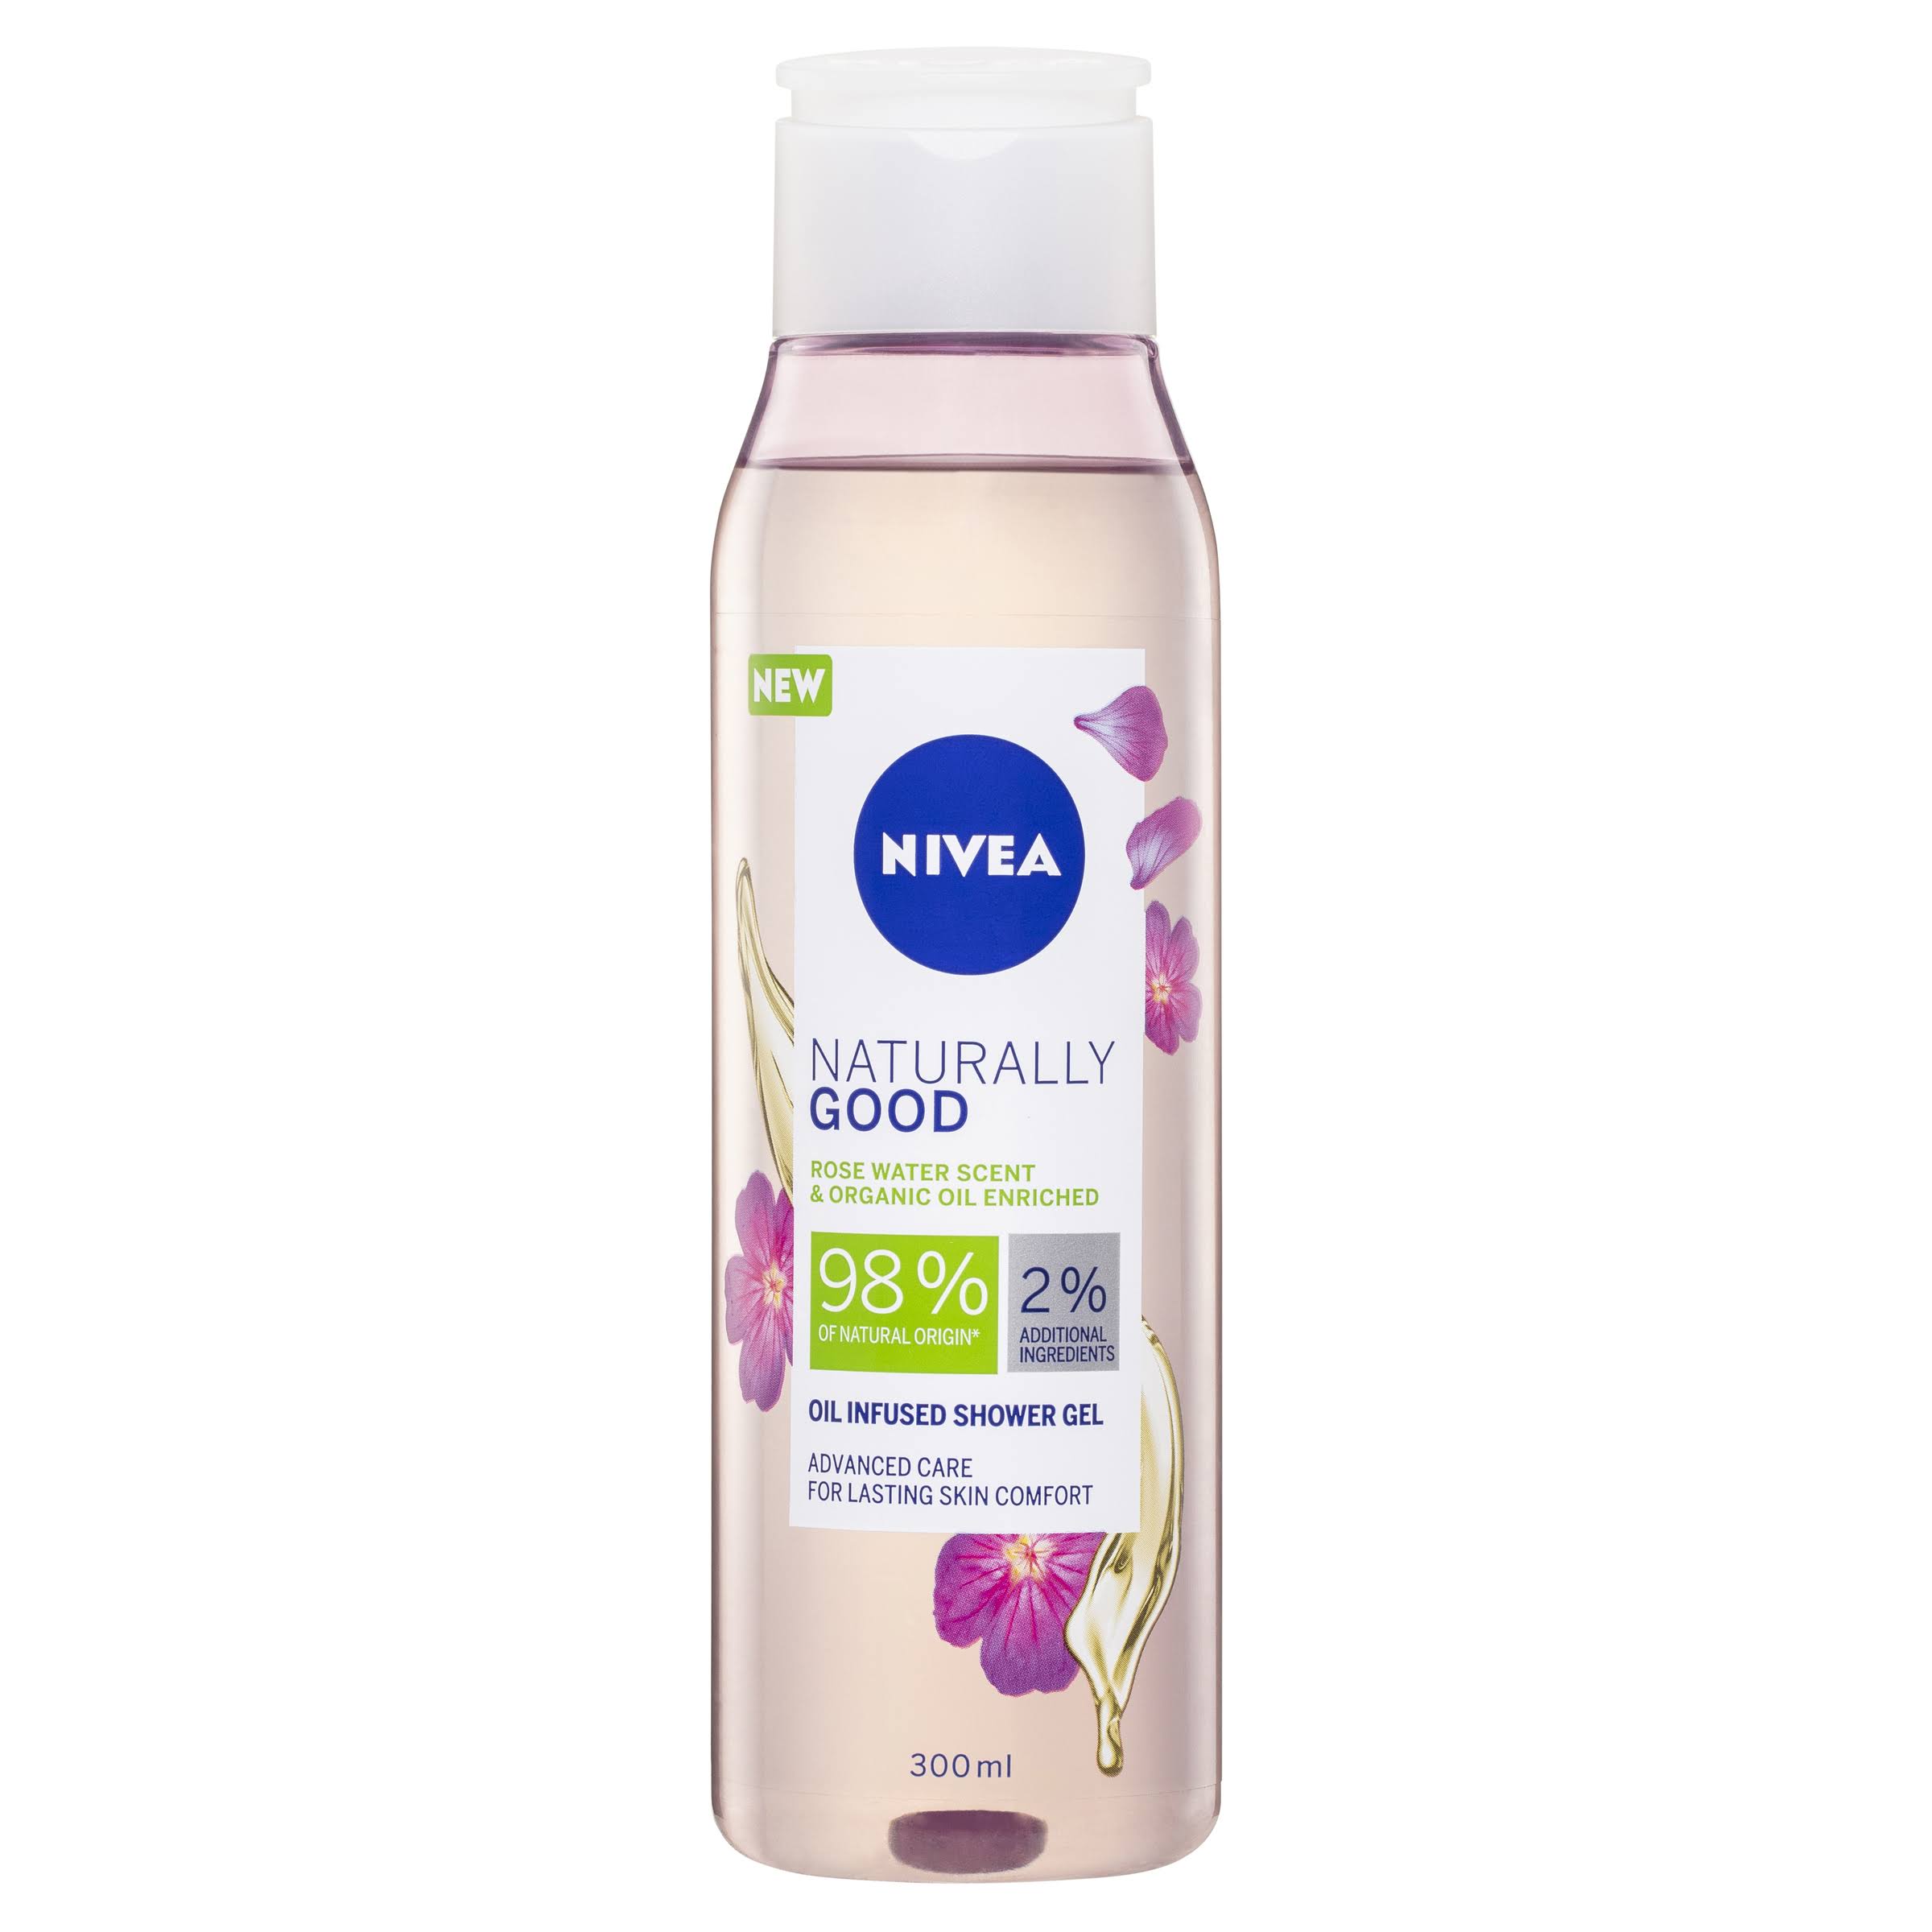 Nivea Naturally Good Shower Gel Rose Water 300ml by dpharmacy